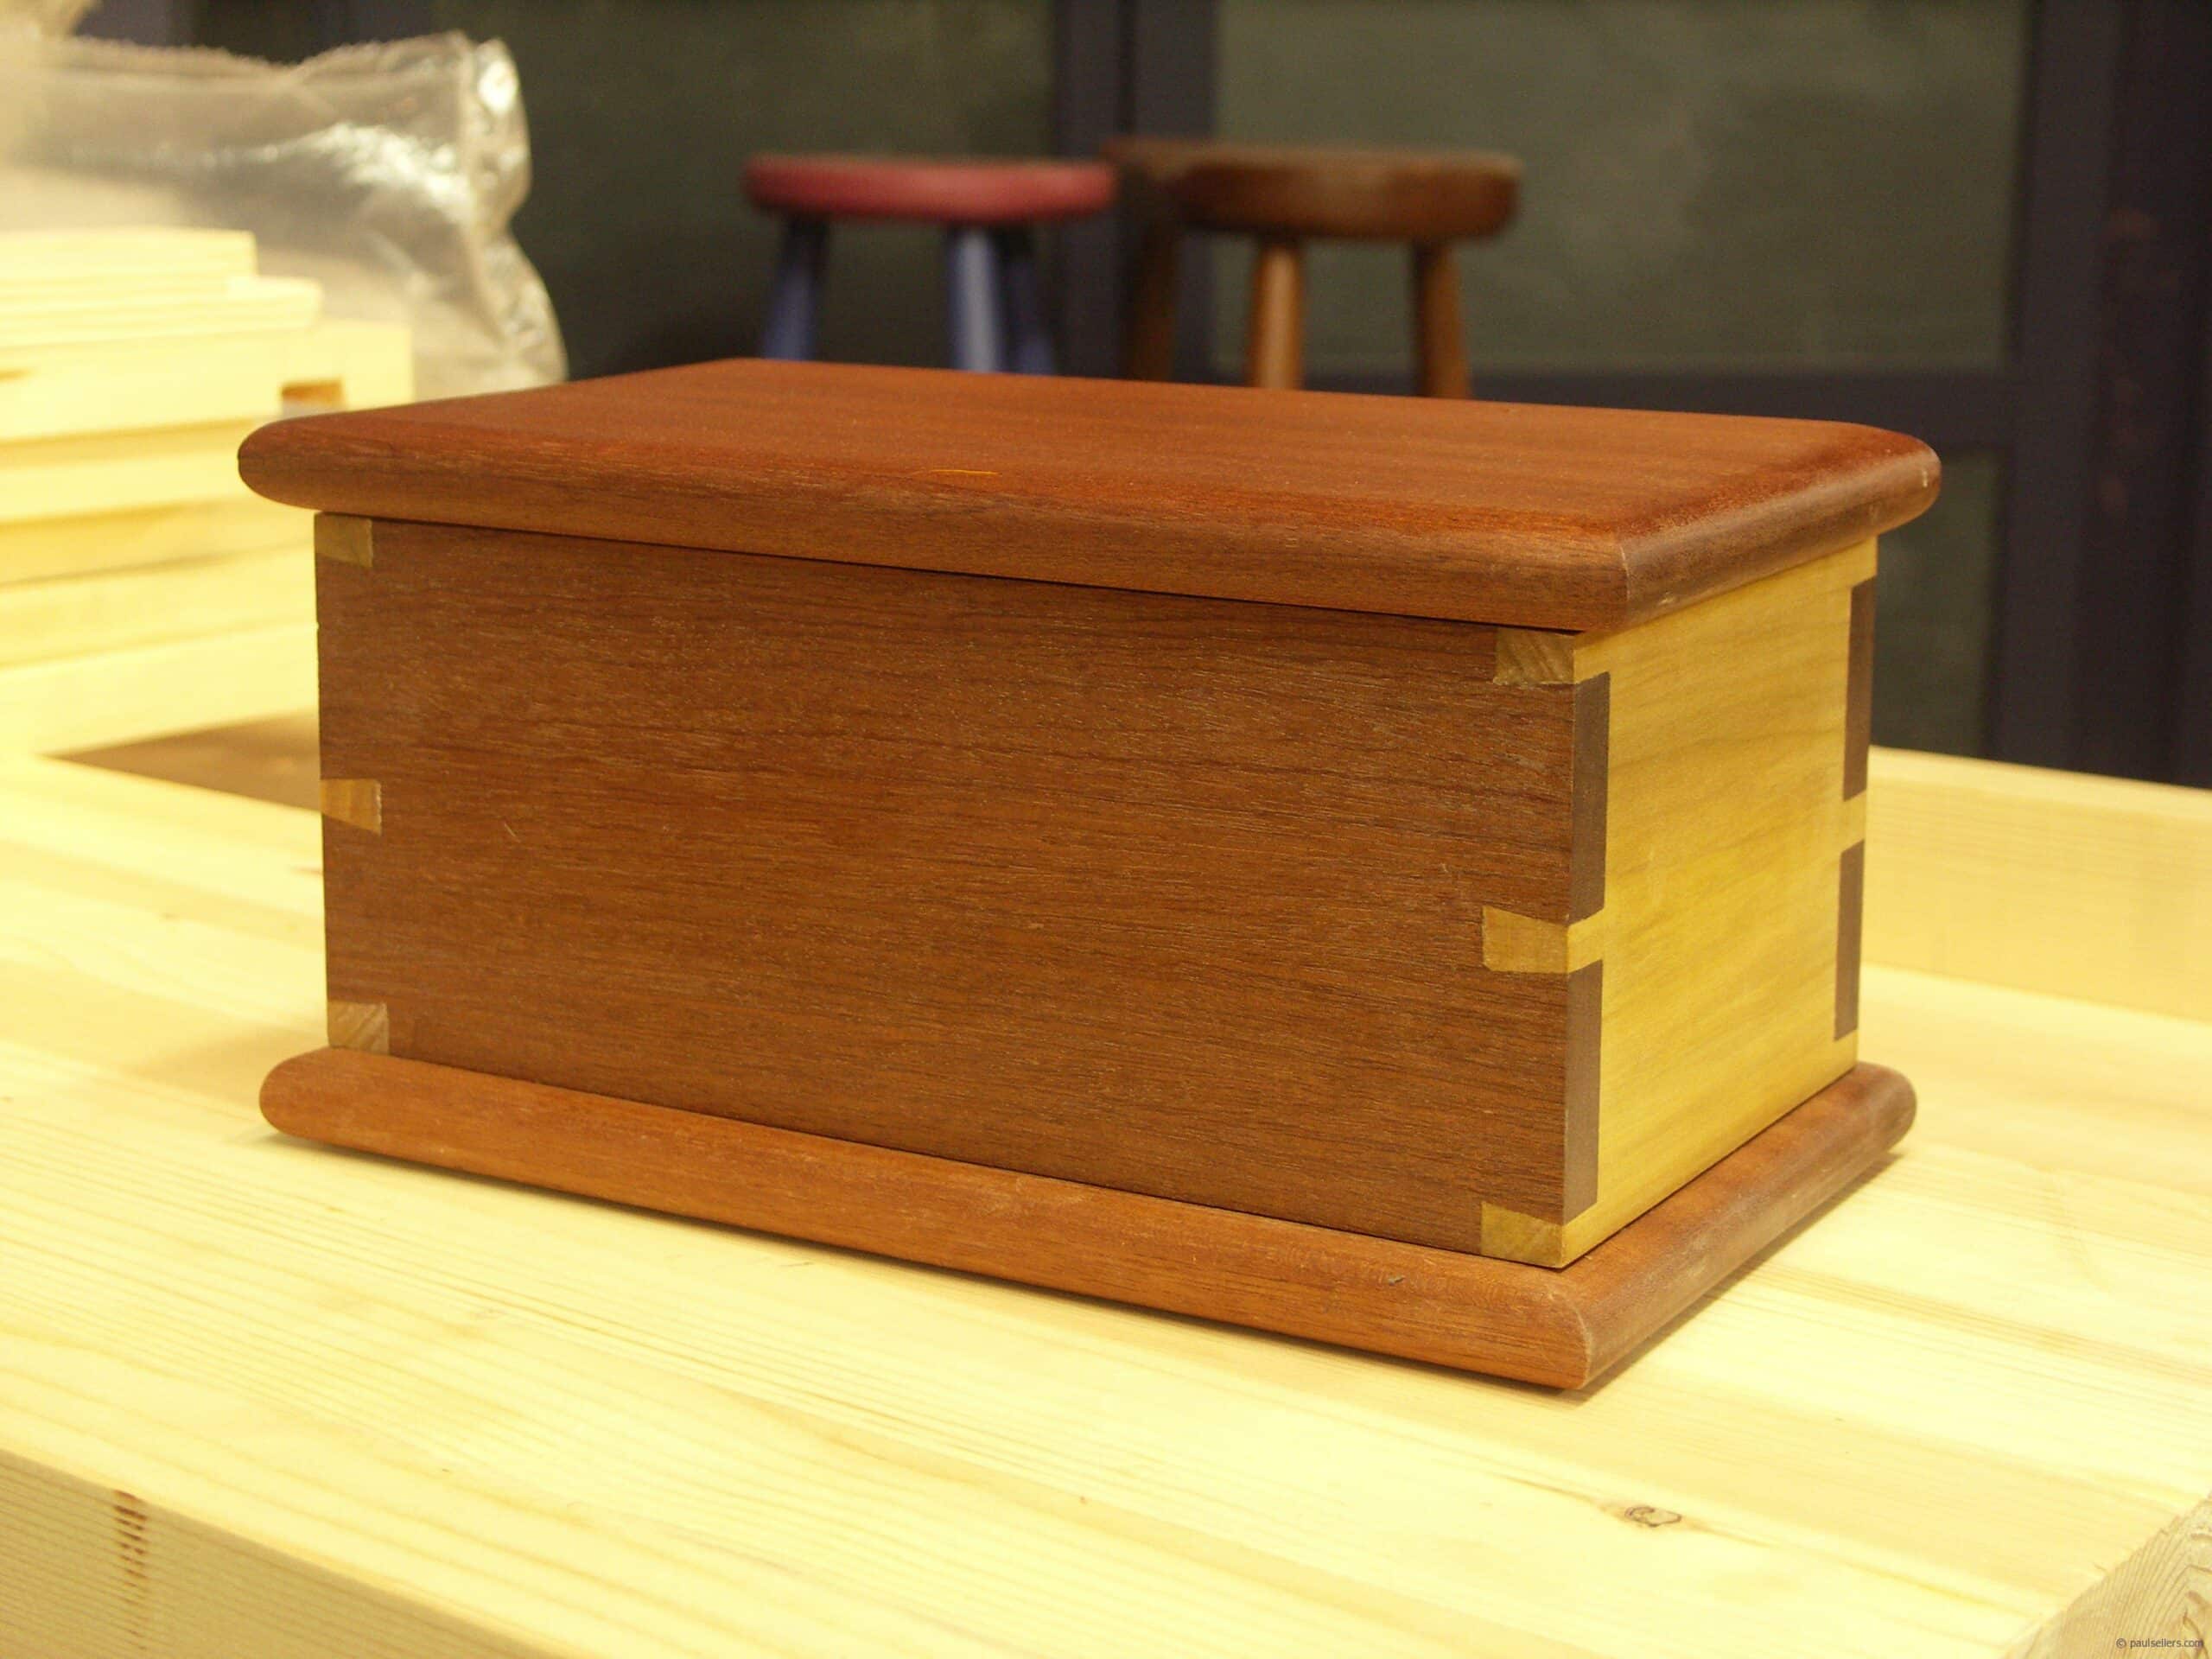 Box Lids Don't Need Hinges - FineWoodworking